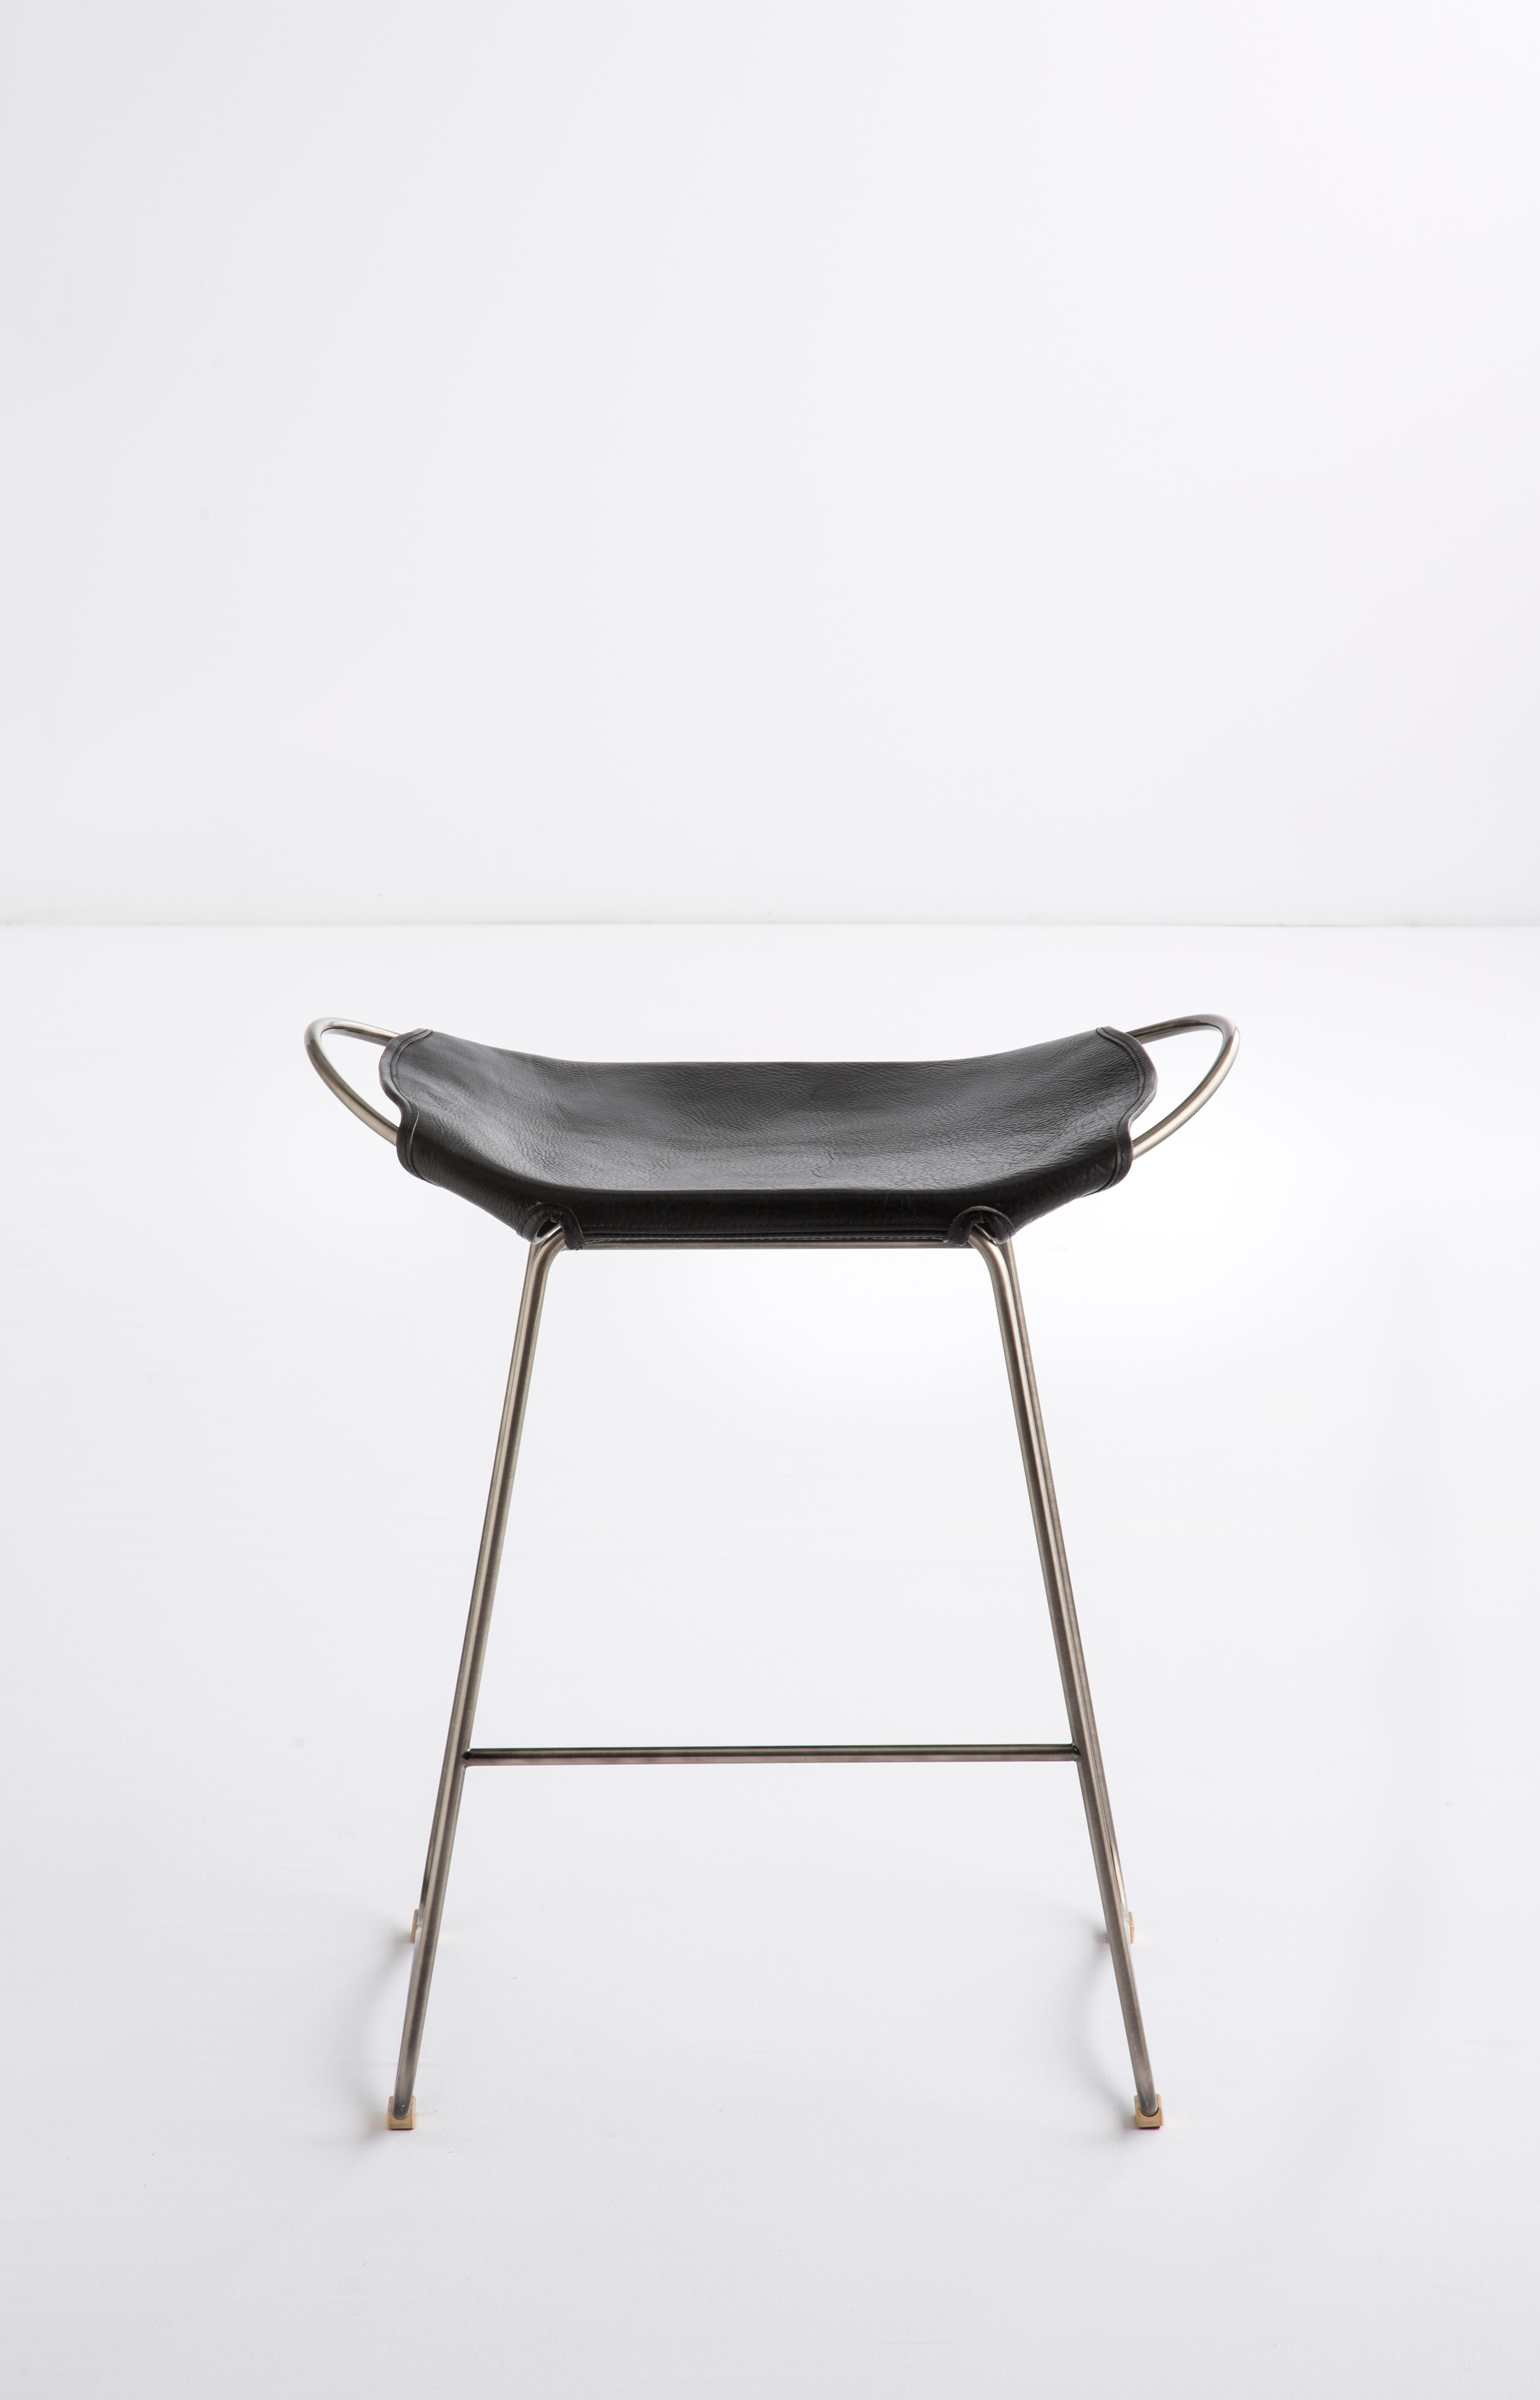 Spanish Sculptural Organic Contemporary Bar Stool Old Silver & Black Leather  Sample For Sale